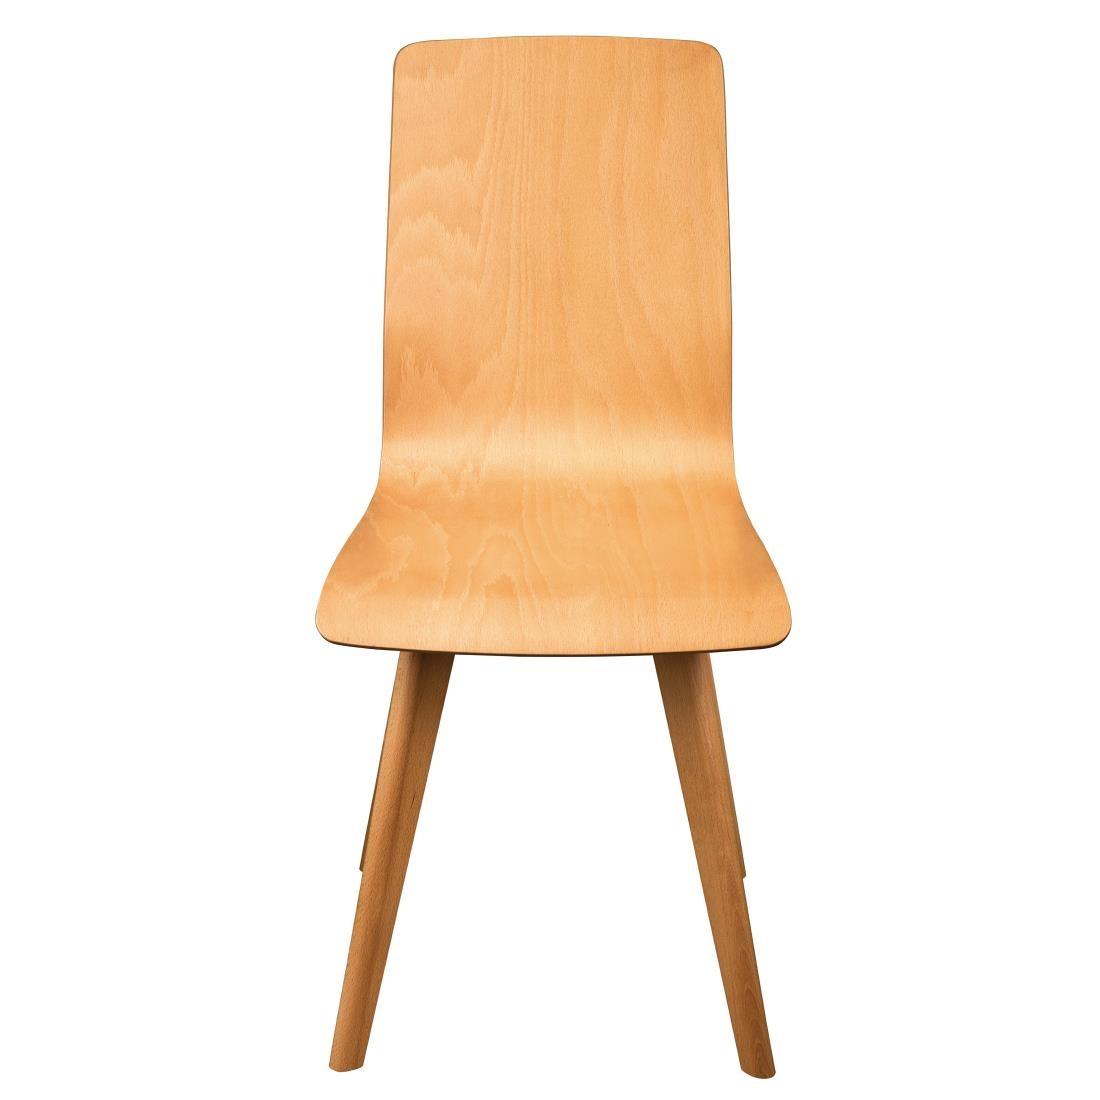 Fameg Wooden Flow Bentwood Beech Side Chairs (Pack of 2) - CW010  - 2